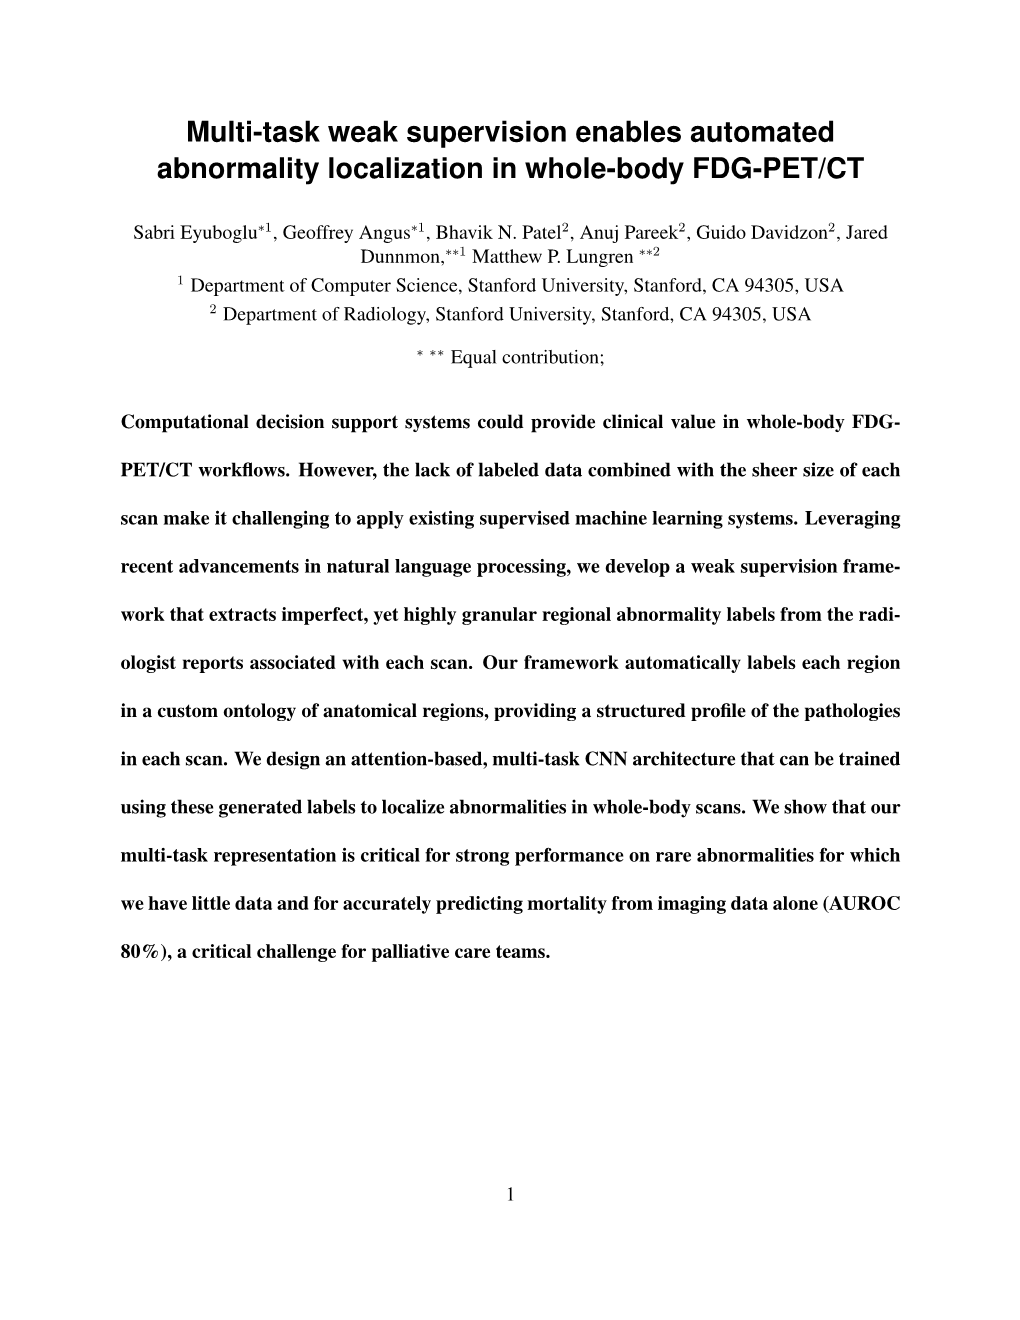 Multi-Task Weak Supervision Enables Automated Abnormality Localization in Whole-Body FDG-PET/CT